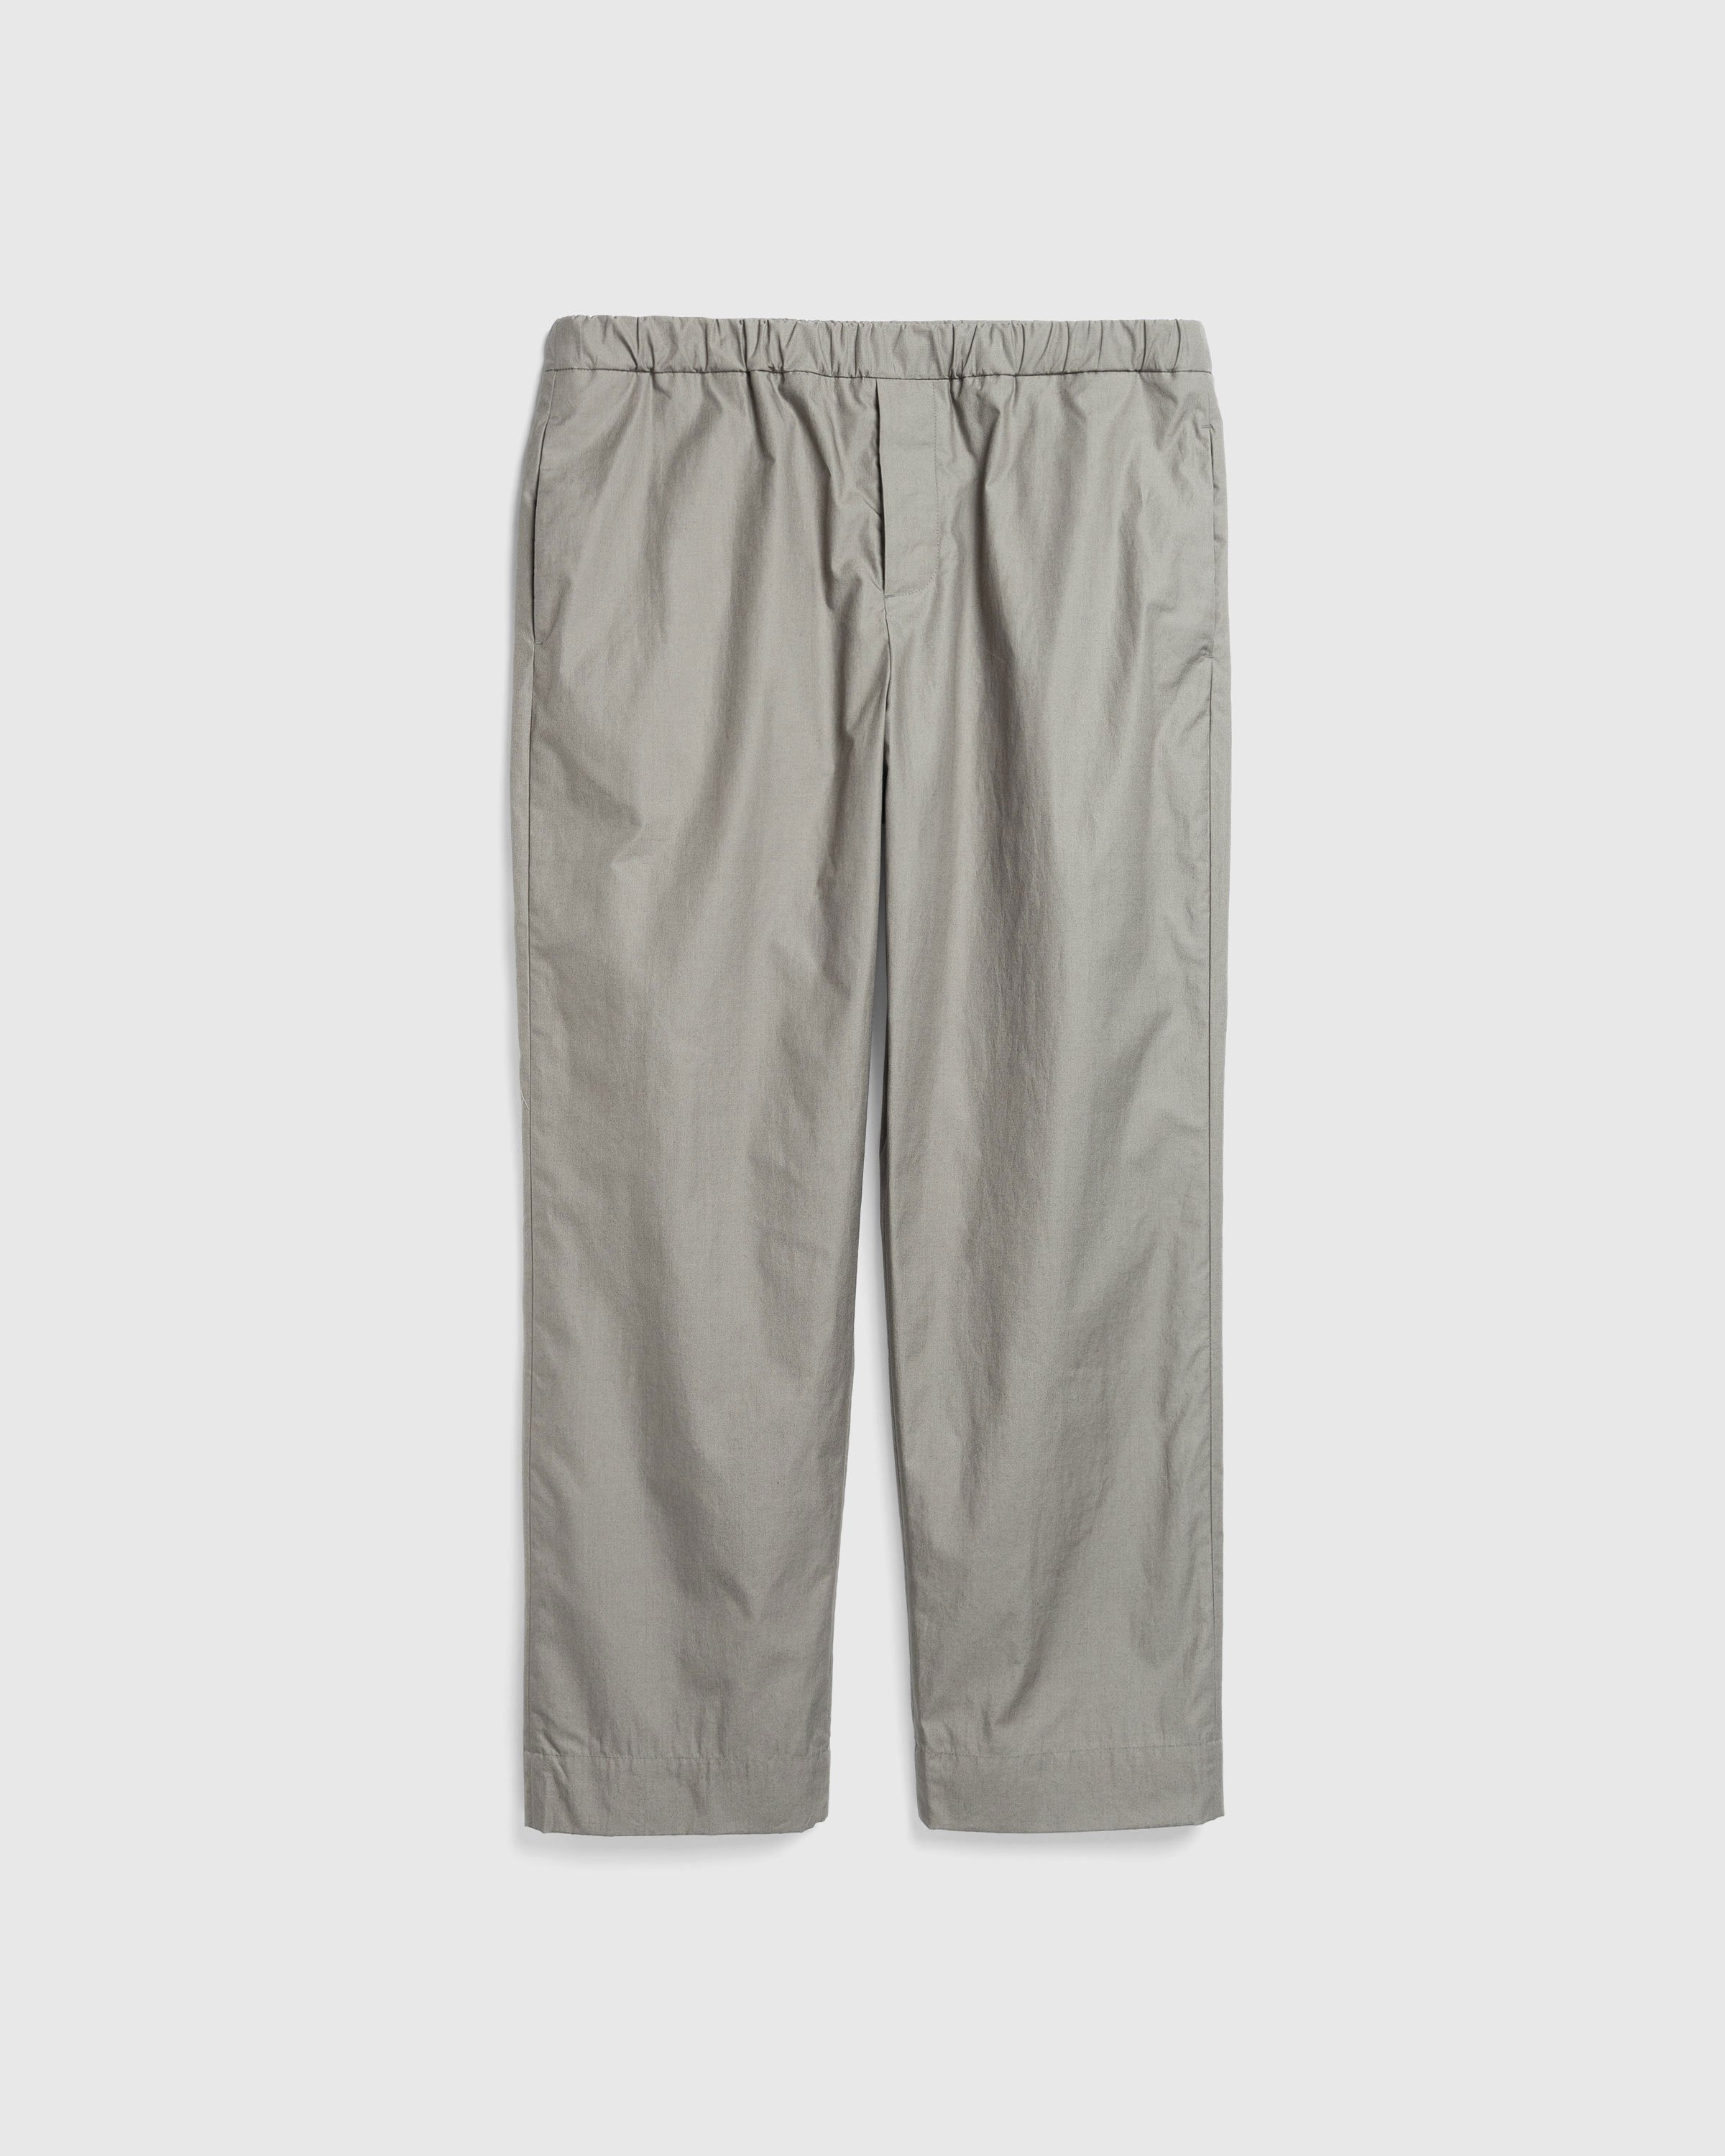 Meta Campania Collective - Ed Unlined Light Weight Cotton Drawstring Trousers Weimaraner Grey - Clothing - Grey - Image 1